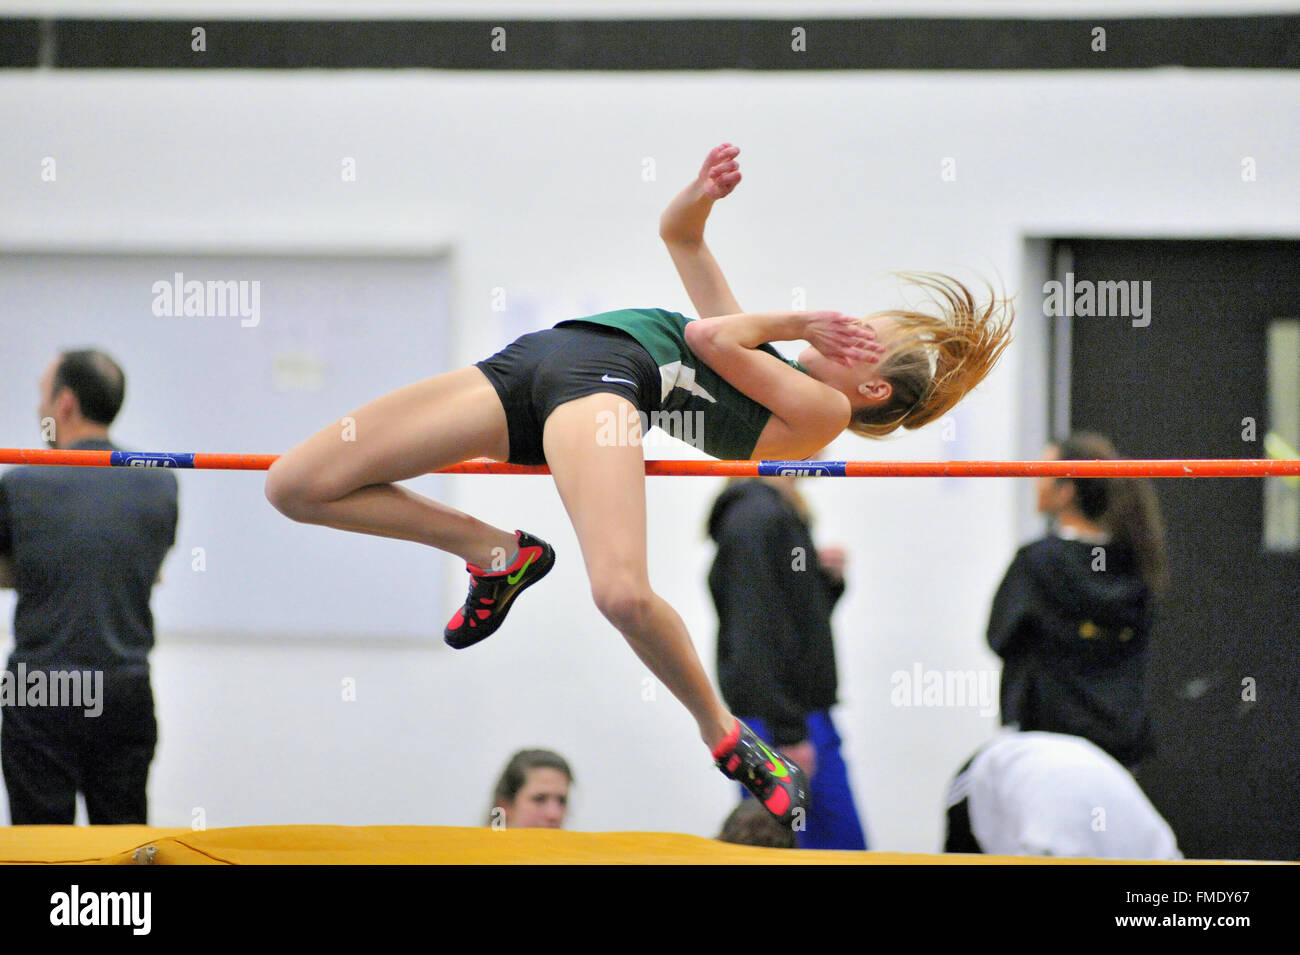 A high school athlete attempting to clear the high jump bar at an indoor meet. USA. Stock Photo